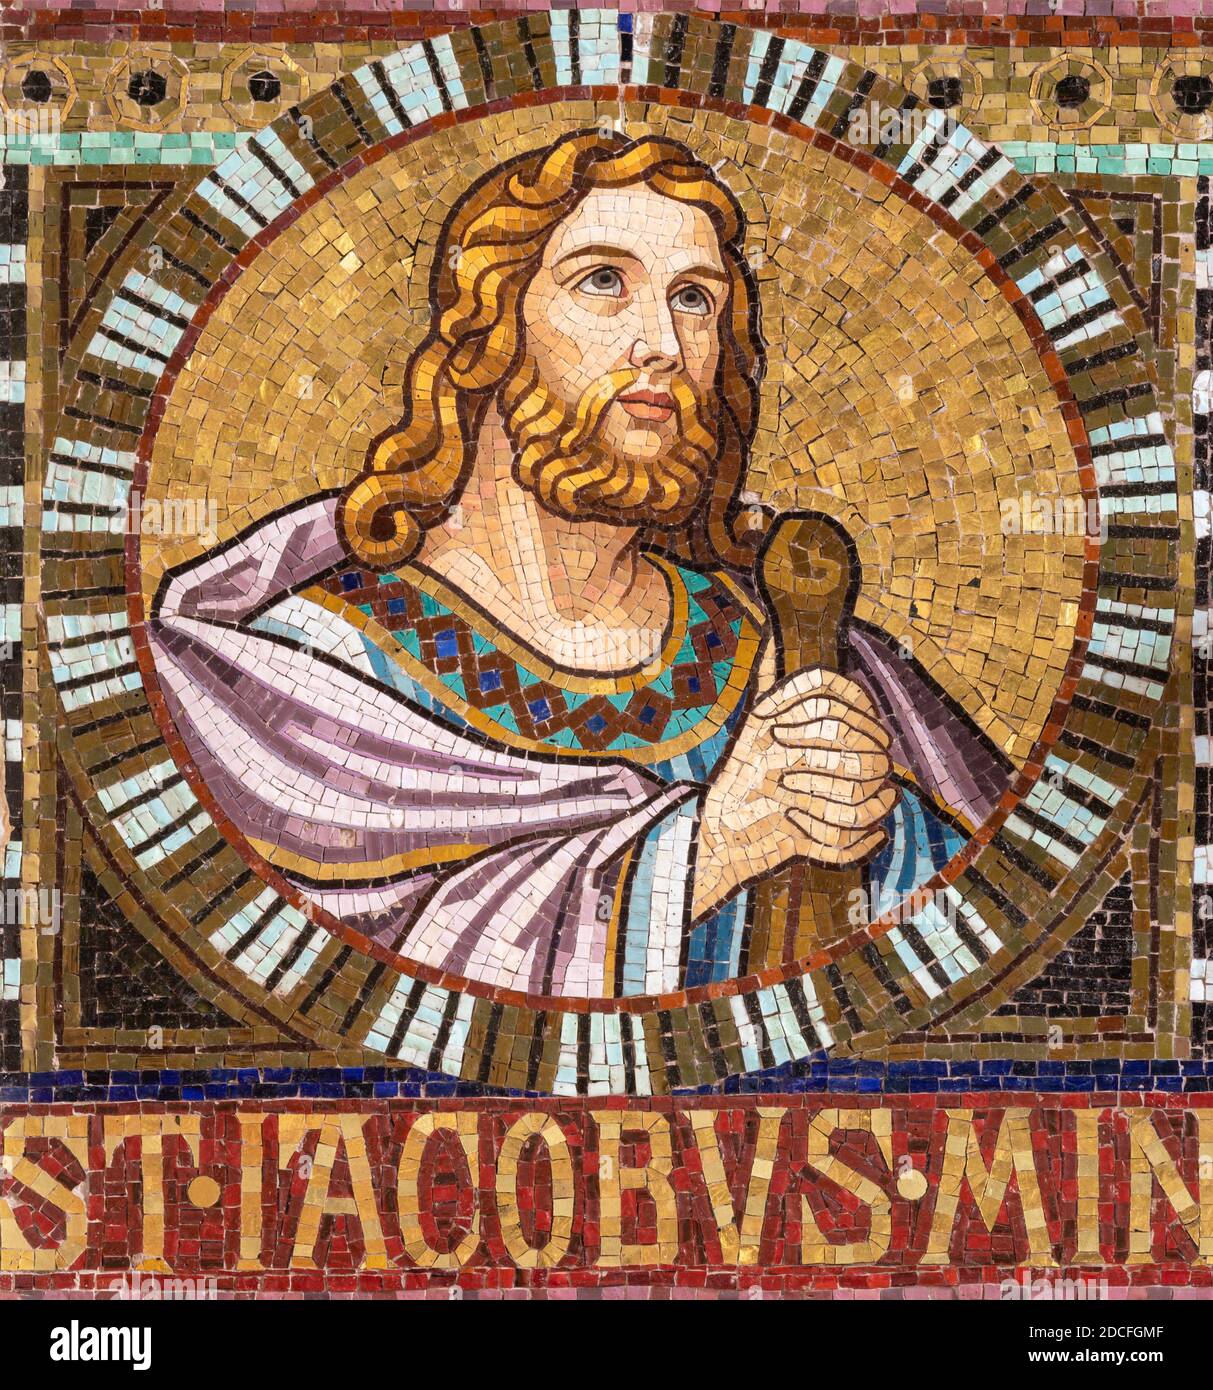 VIENNA, AUSTIRA - OCTOBER 22, 2020: The detail of apostle St. James the Lees from mosaic of Immaculate Conception in church Pfarrkirche Kaisermühlen. Stock Photo